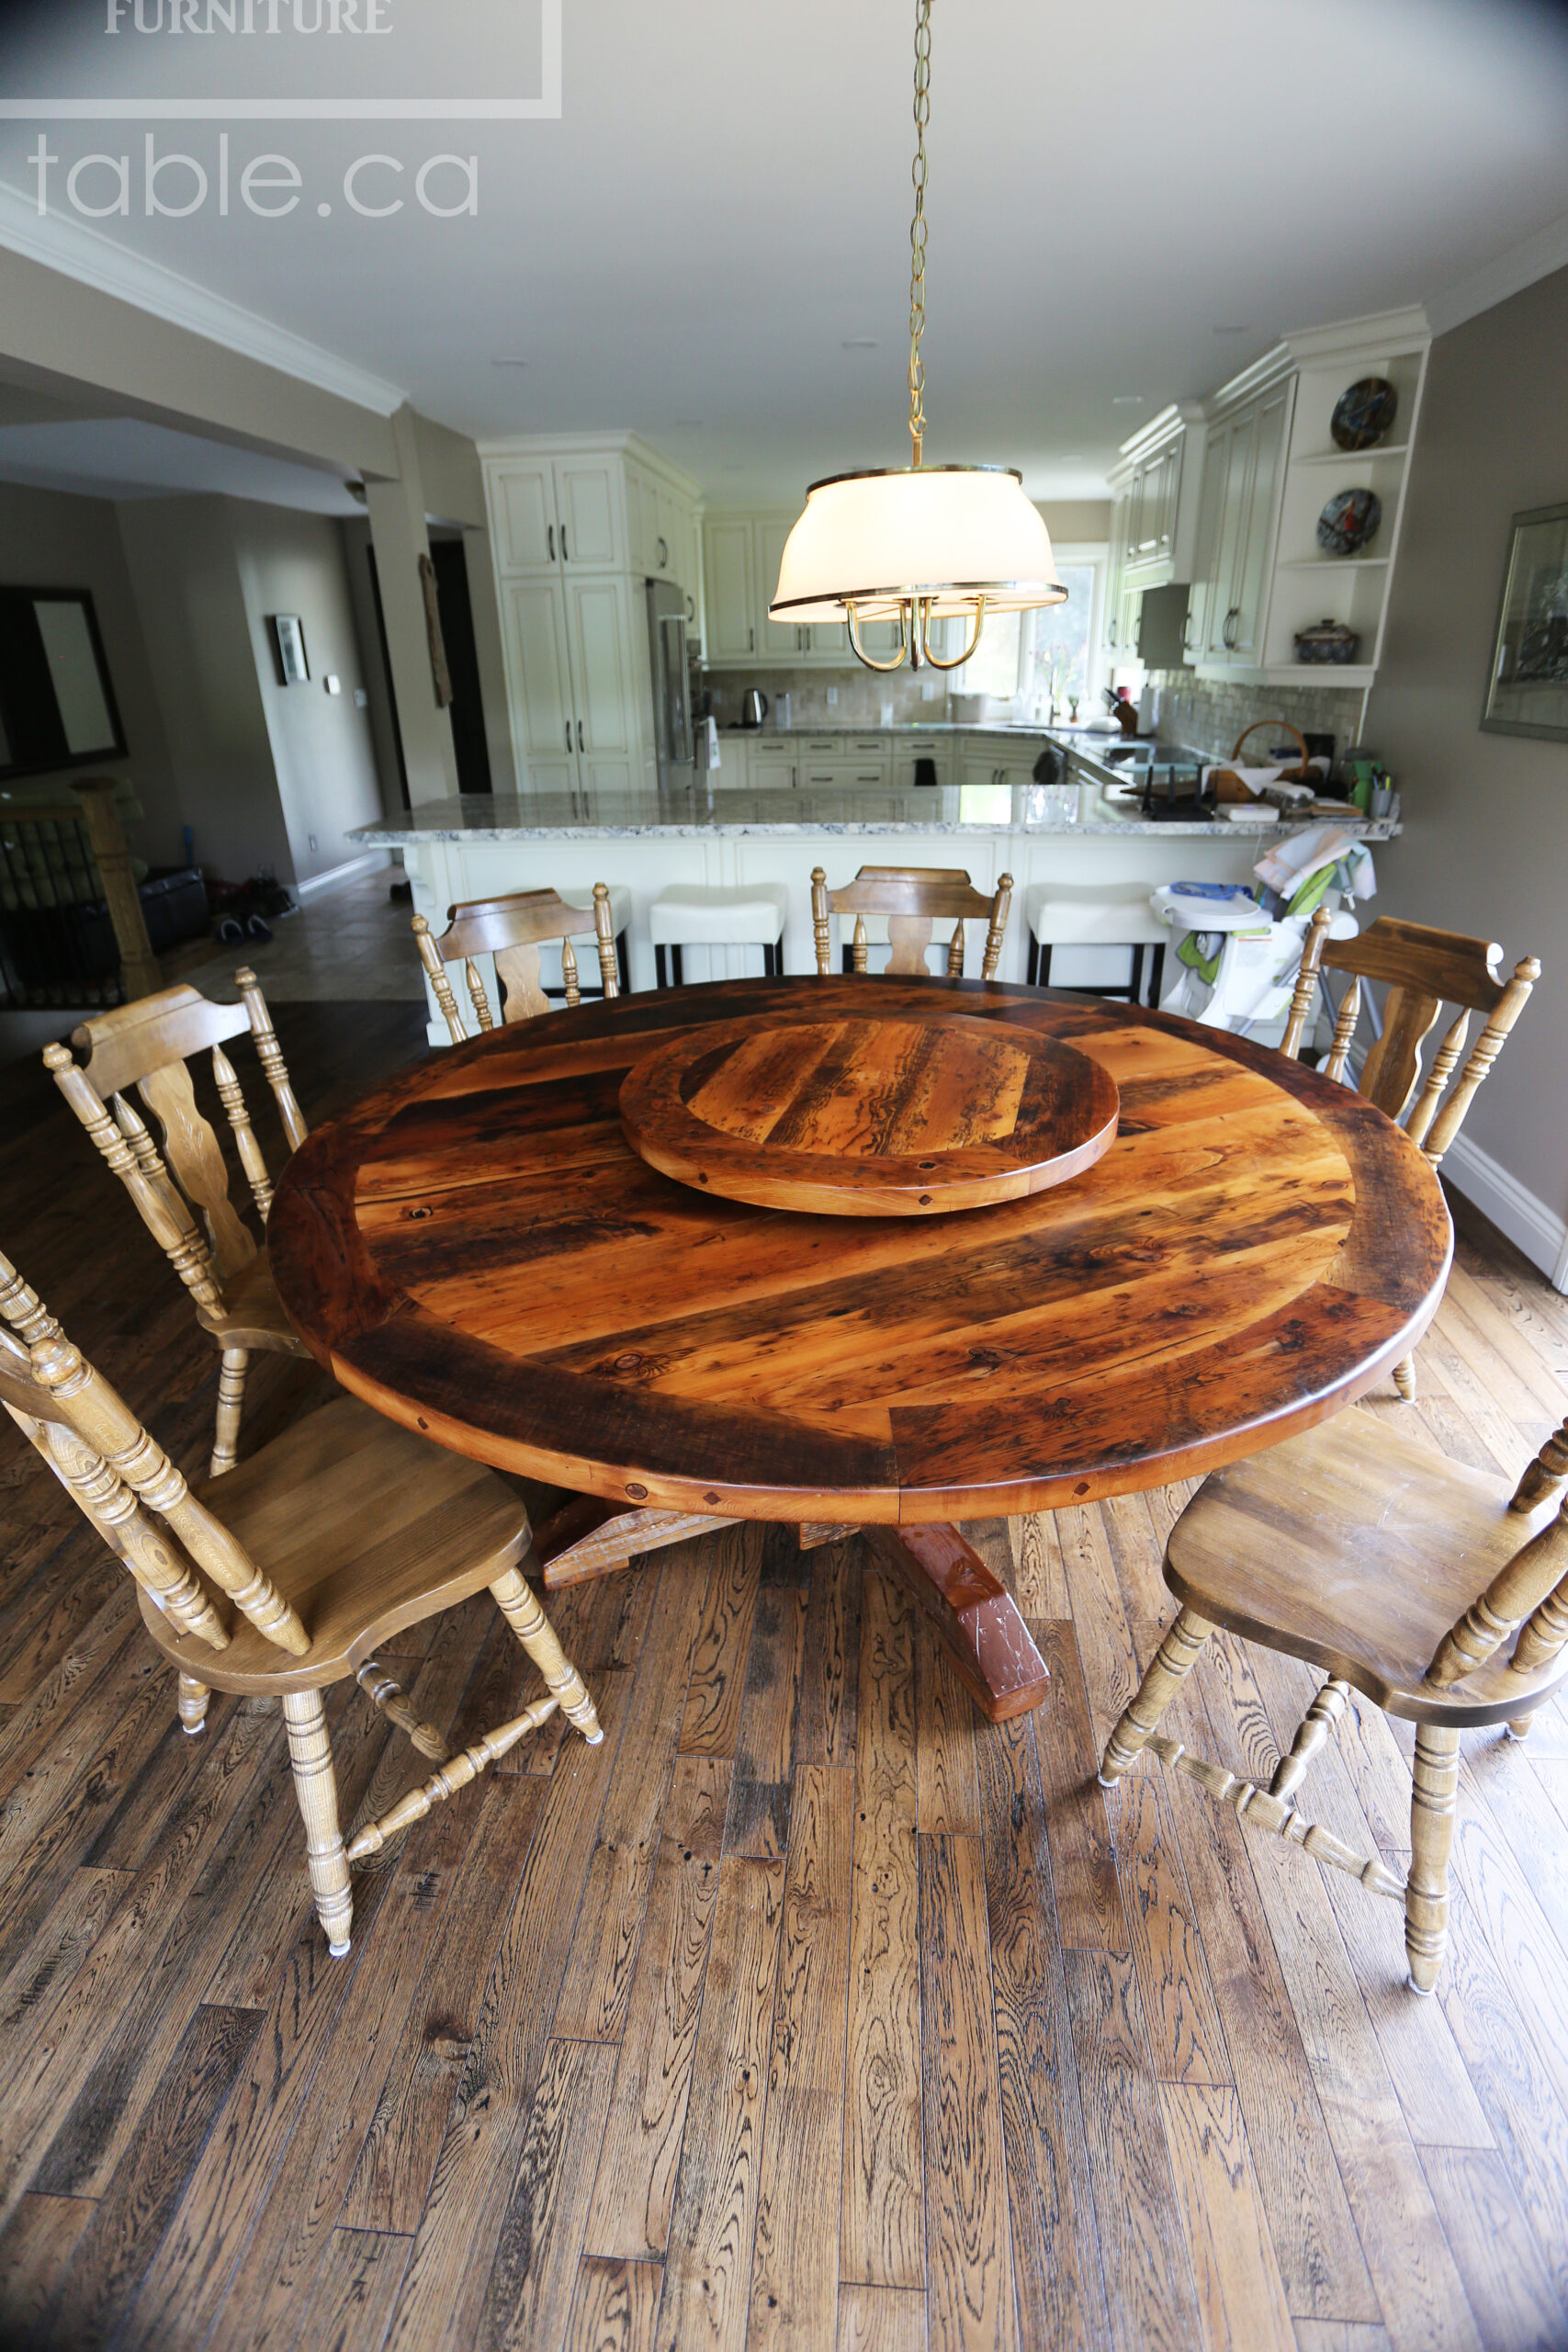 72" Round Ontario Barnwood Table we made for a Meaford, Ontario home - Hand-Hewn Beam Post Base - 2" Hemlock Threshing Floor Top -  Original edges & distressing maintained - Premium epoxy + matte polyurethane finish - [Matching] 32" Round Lazy Susan - www.table.ca